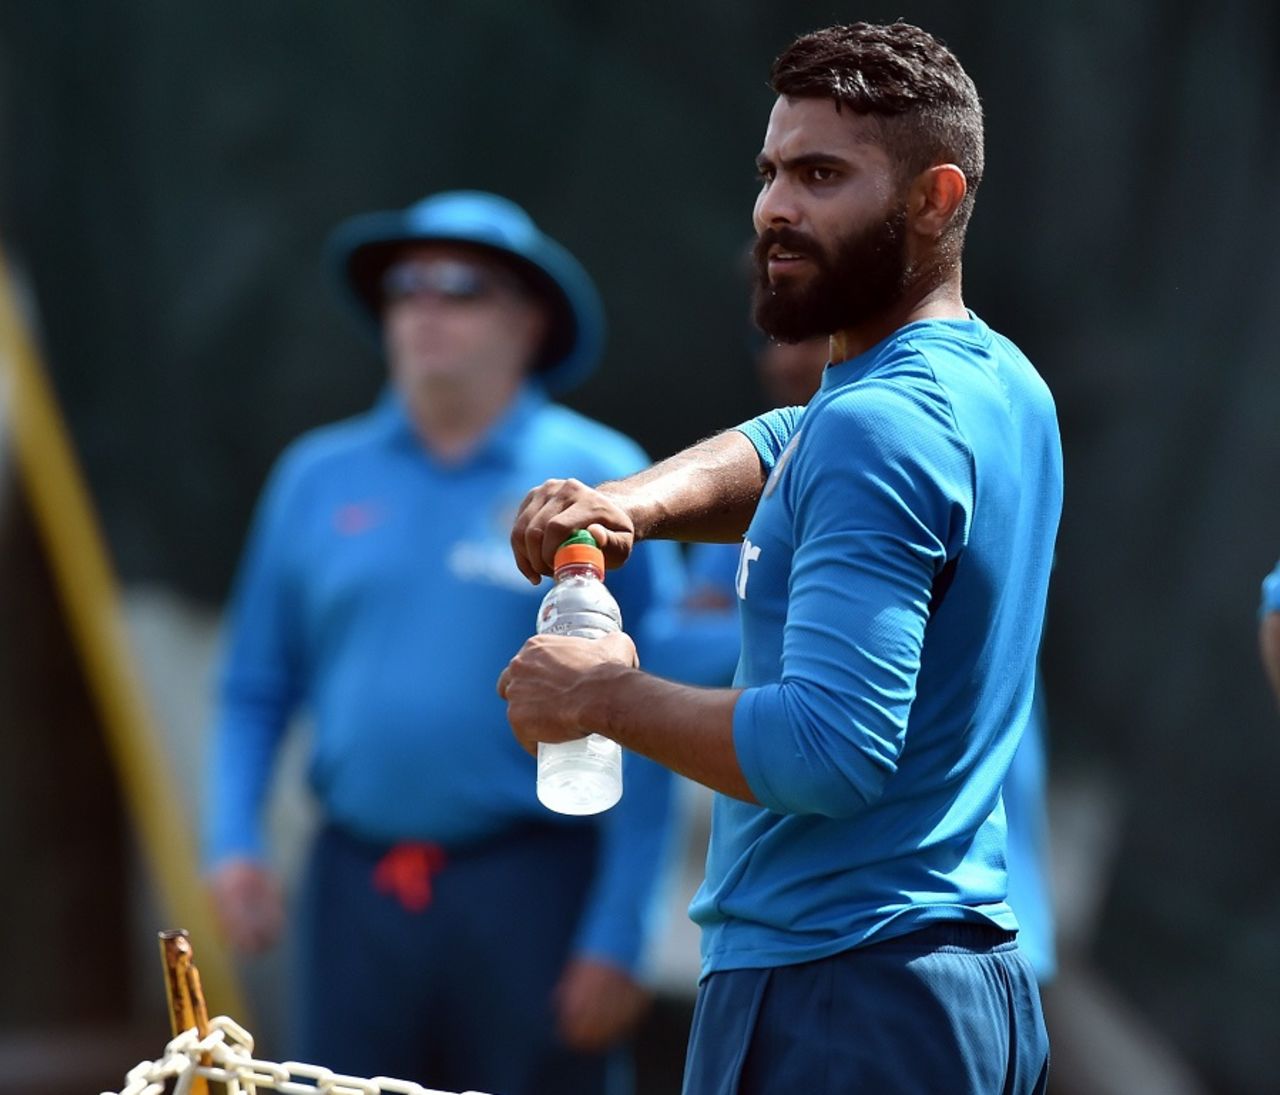 Ravindra Jadeja takes a breather during training, World Cup 2015, Sydney, March 25, 2015